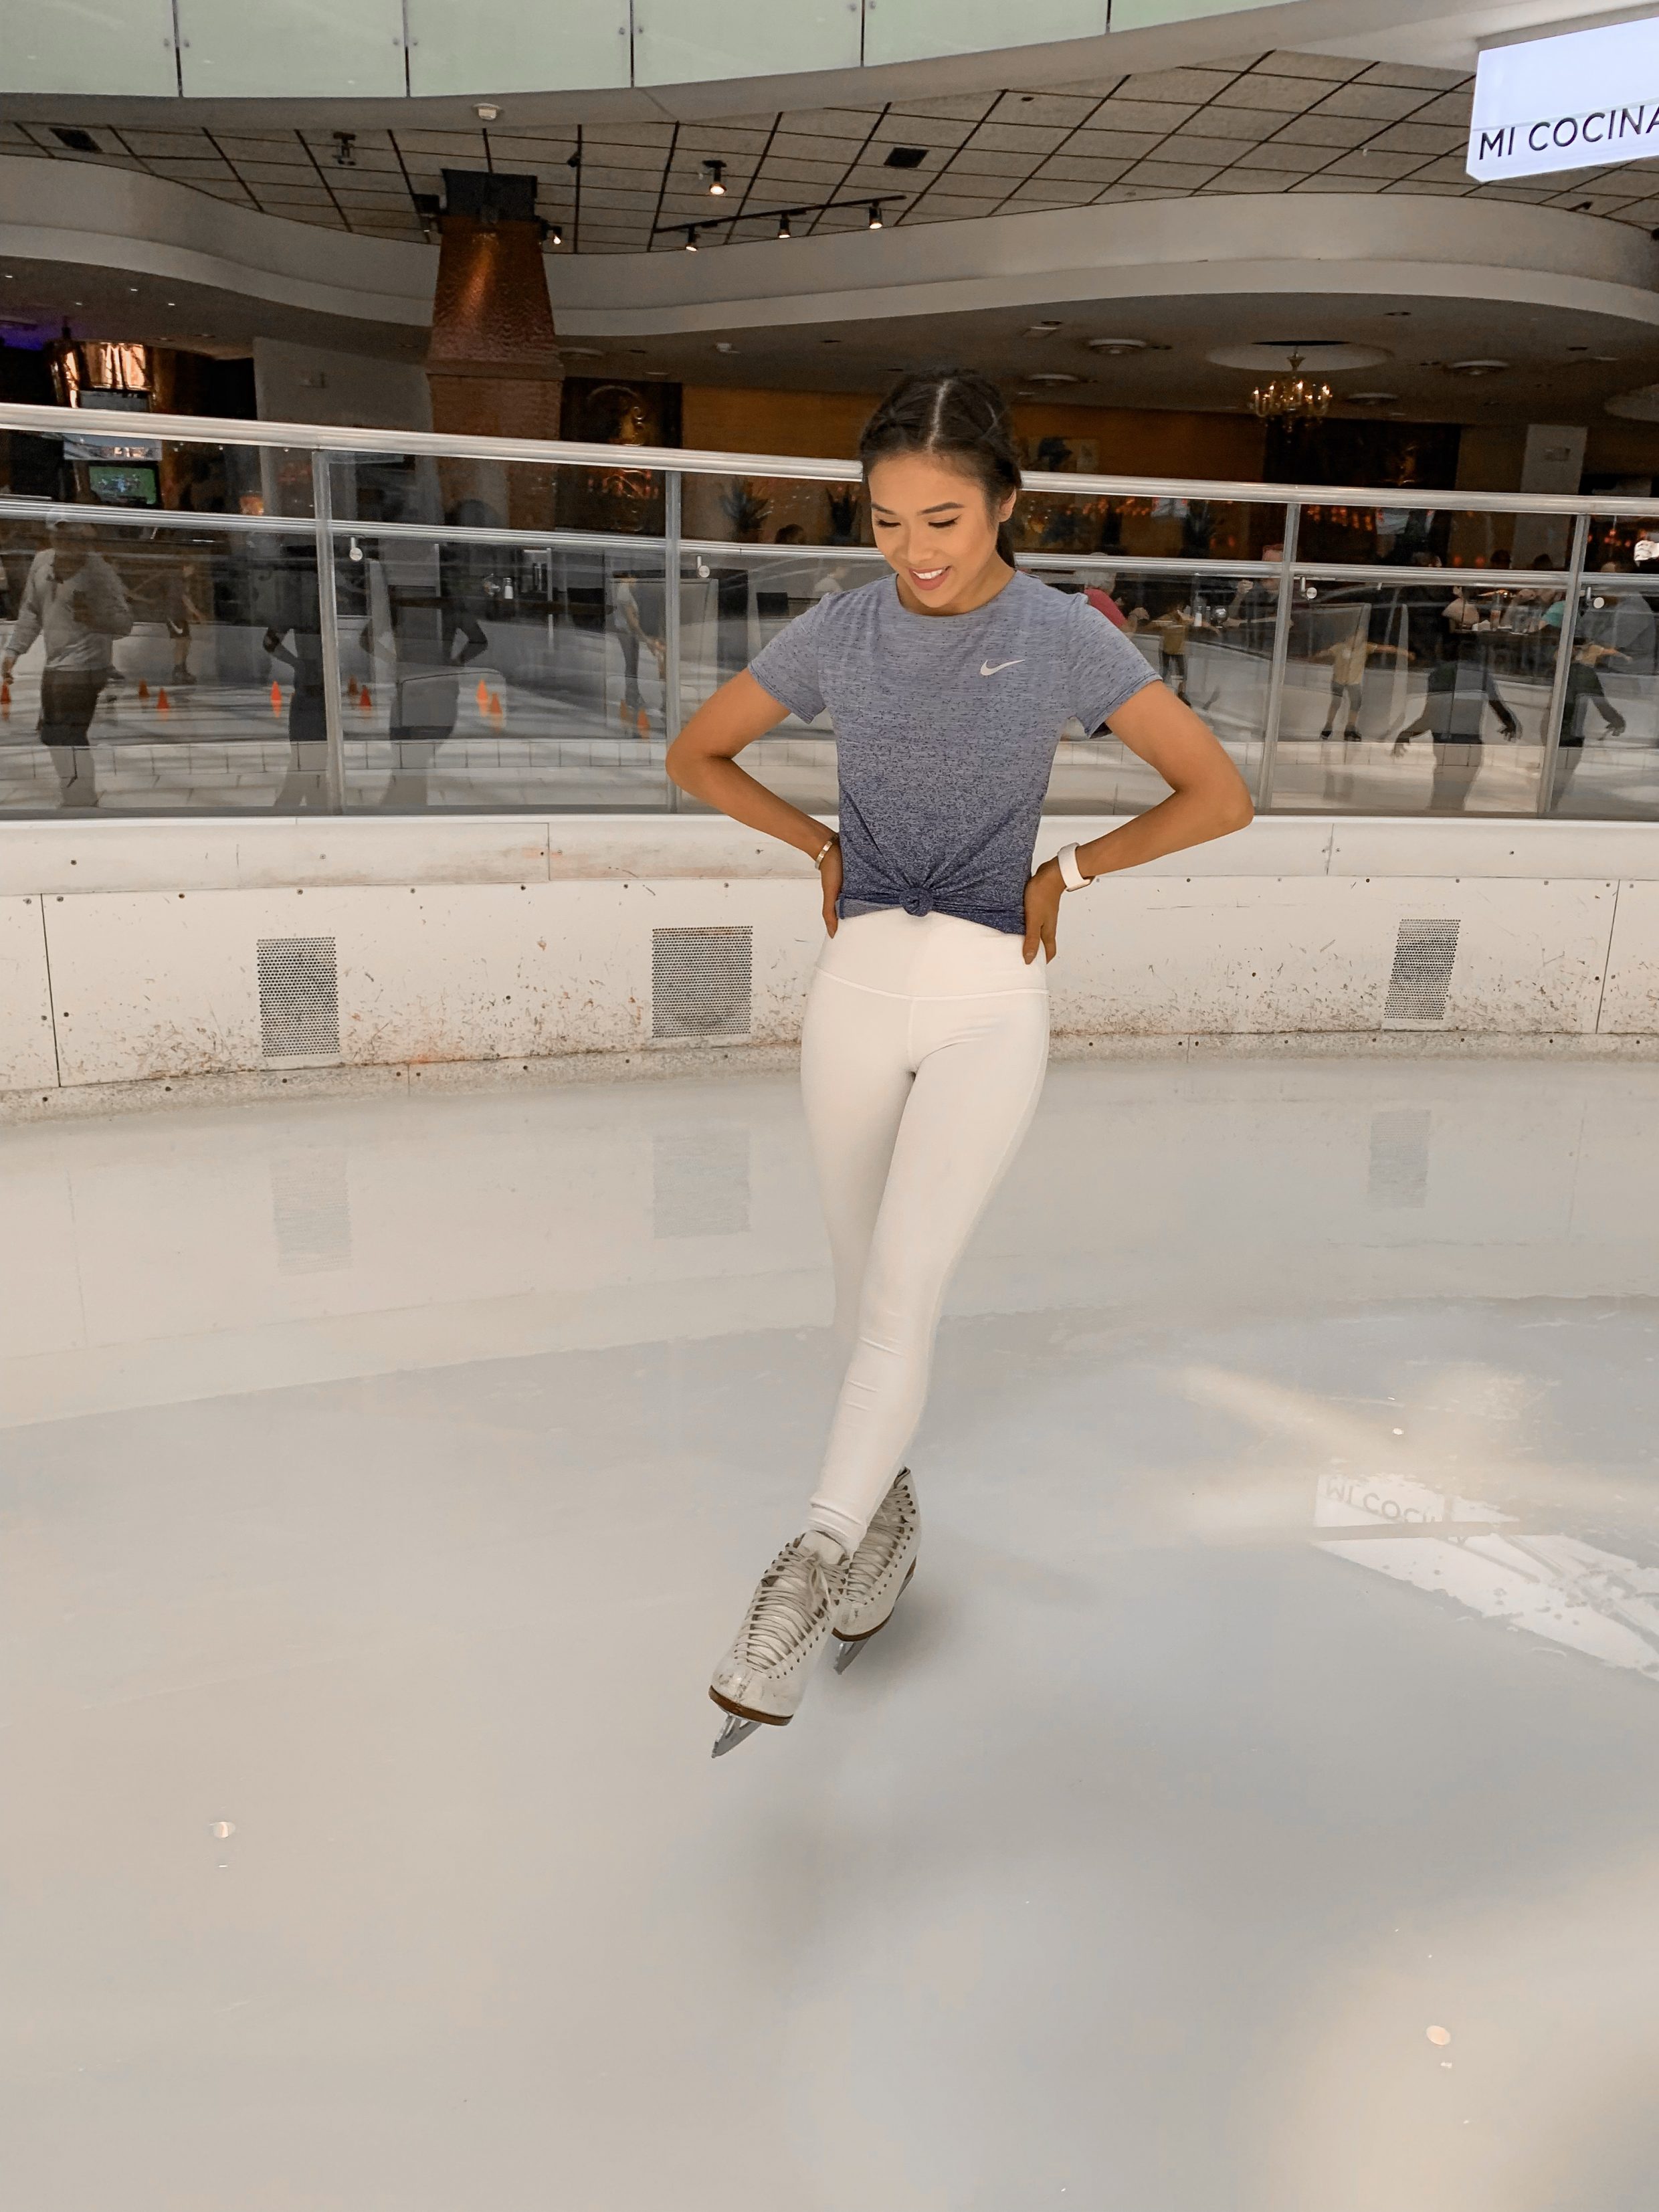 Ice skating outfit featuring blue dri-fit shirt and white high waisted leggings